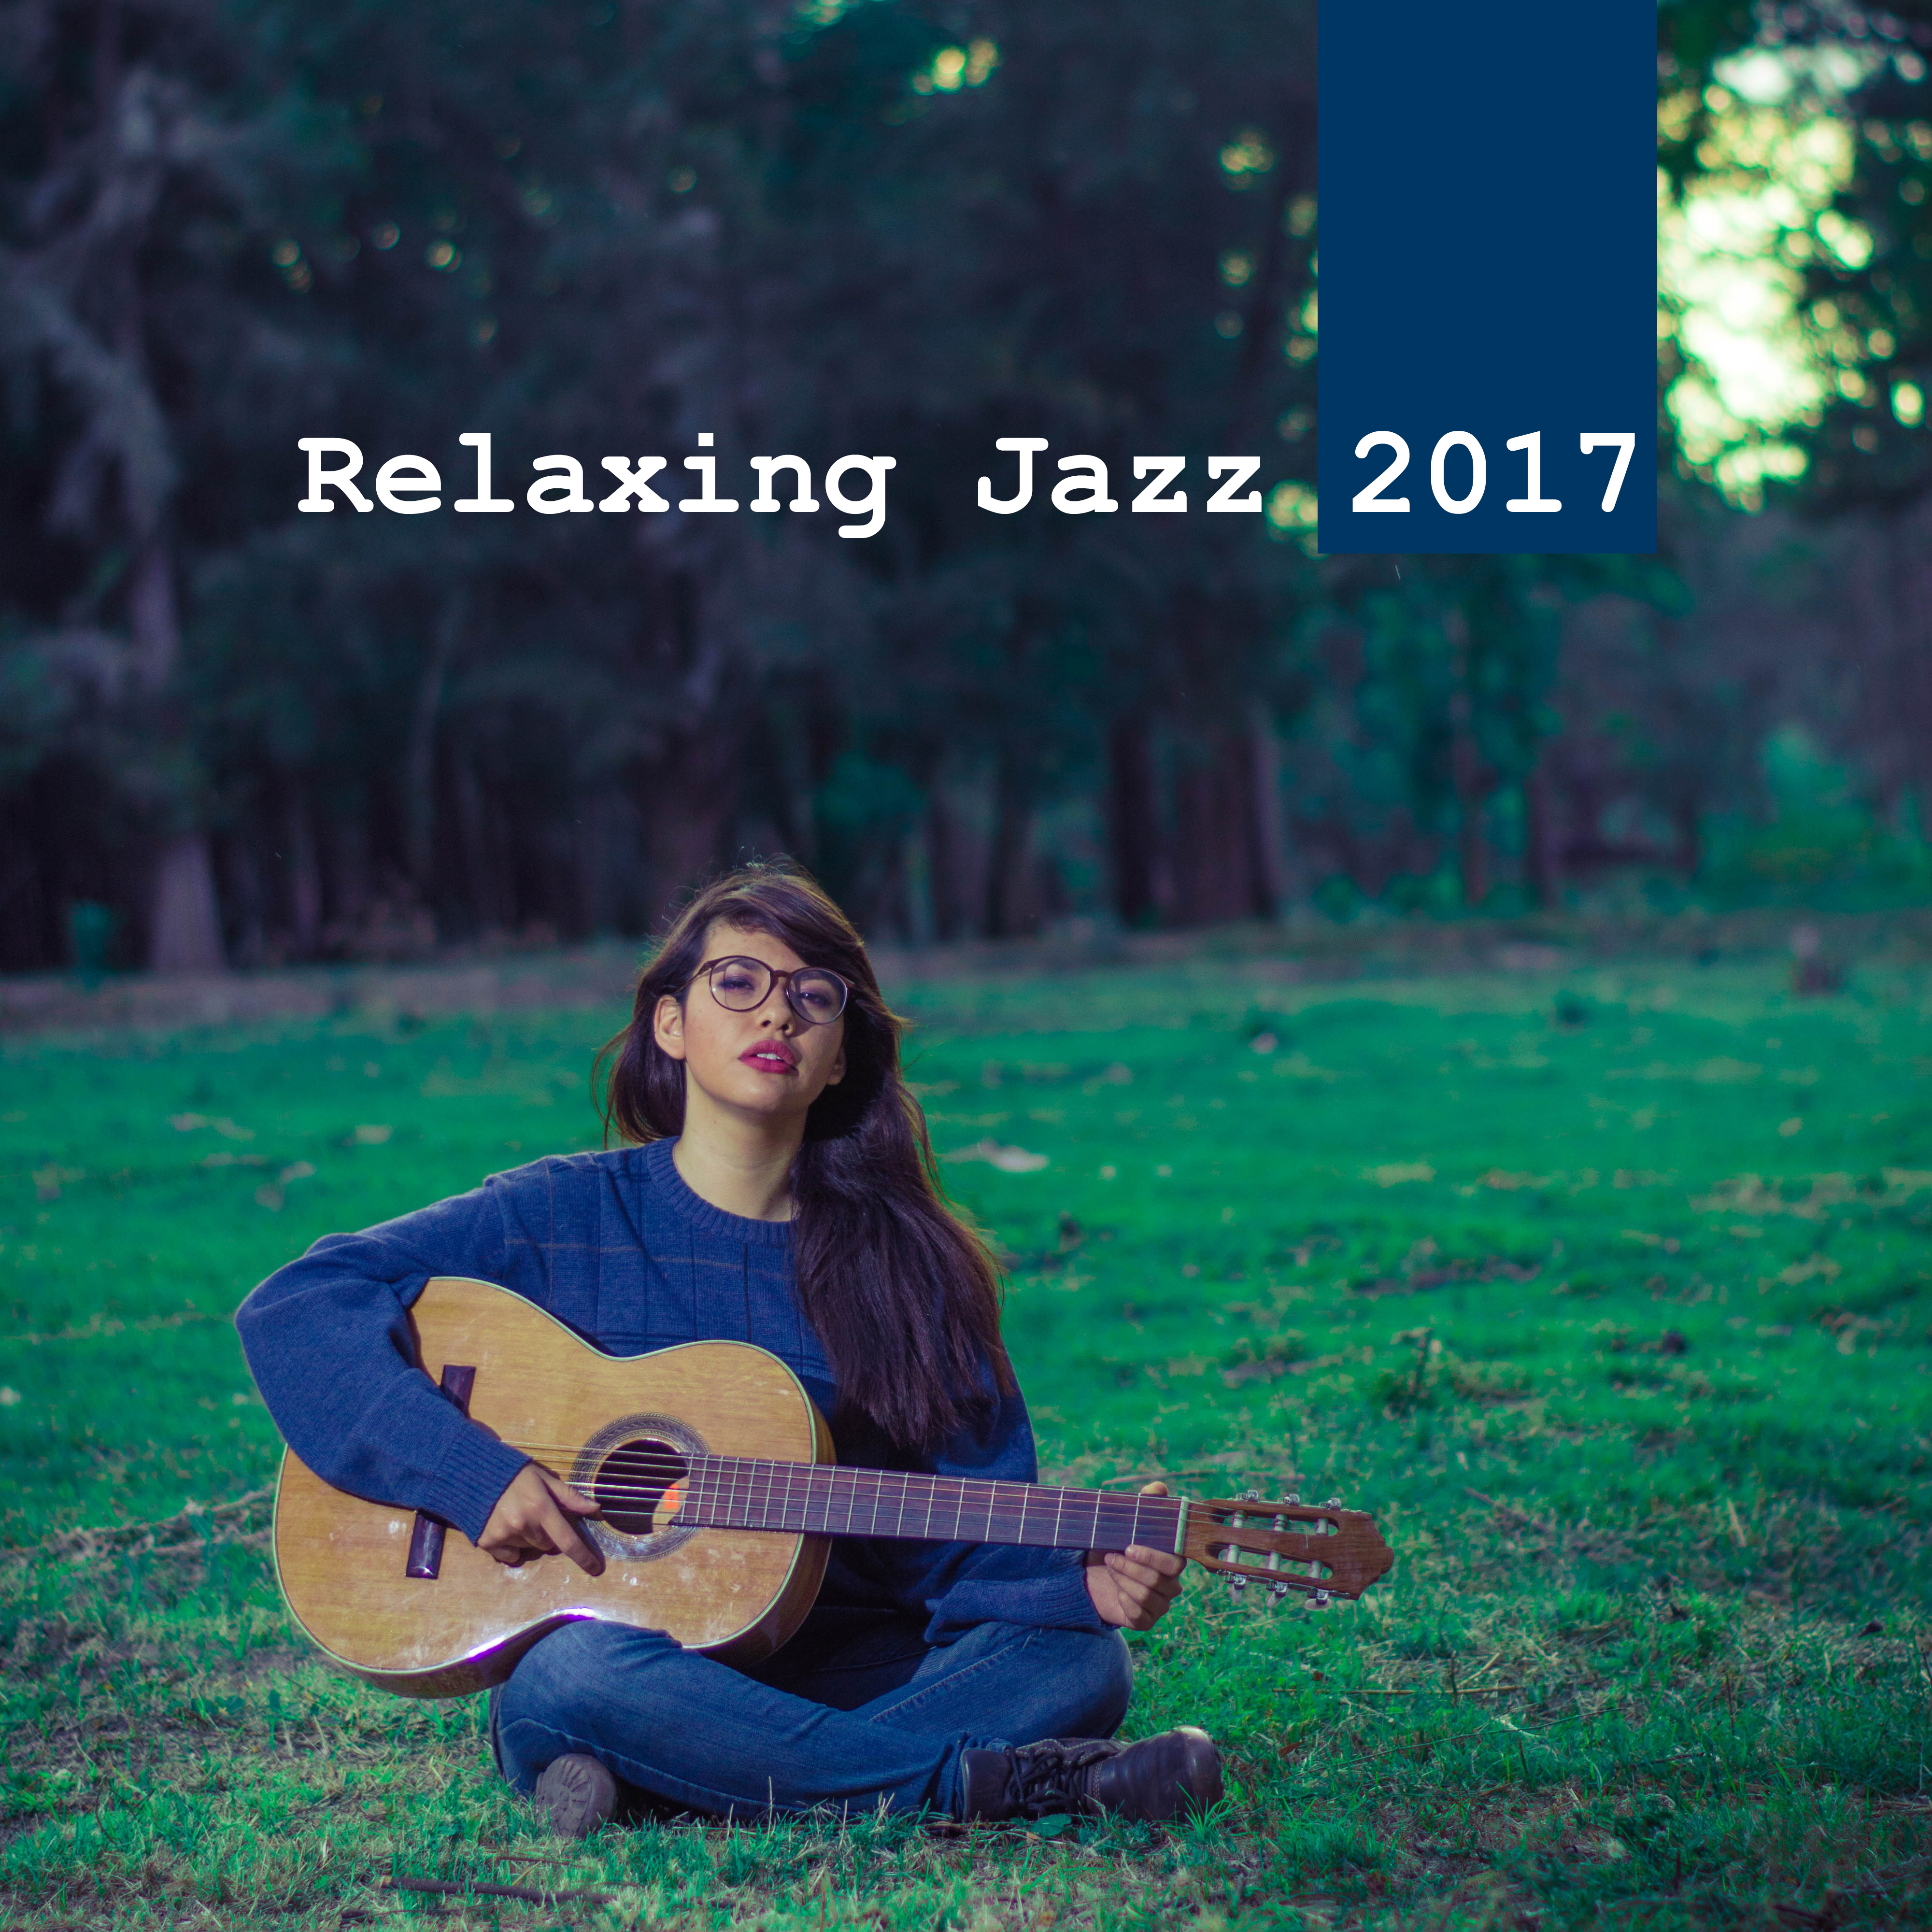 Relaxing Jazz 2017 – Peaceful Melodies of Classic Jazz, Chill Jazz Lounge, Smooth Jazz